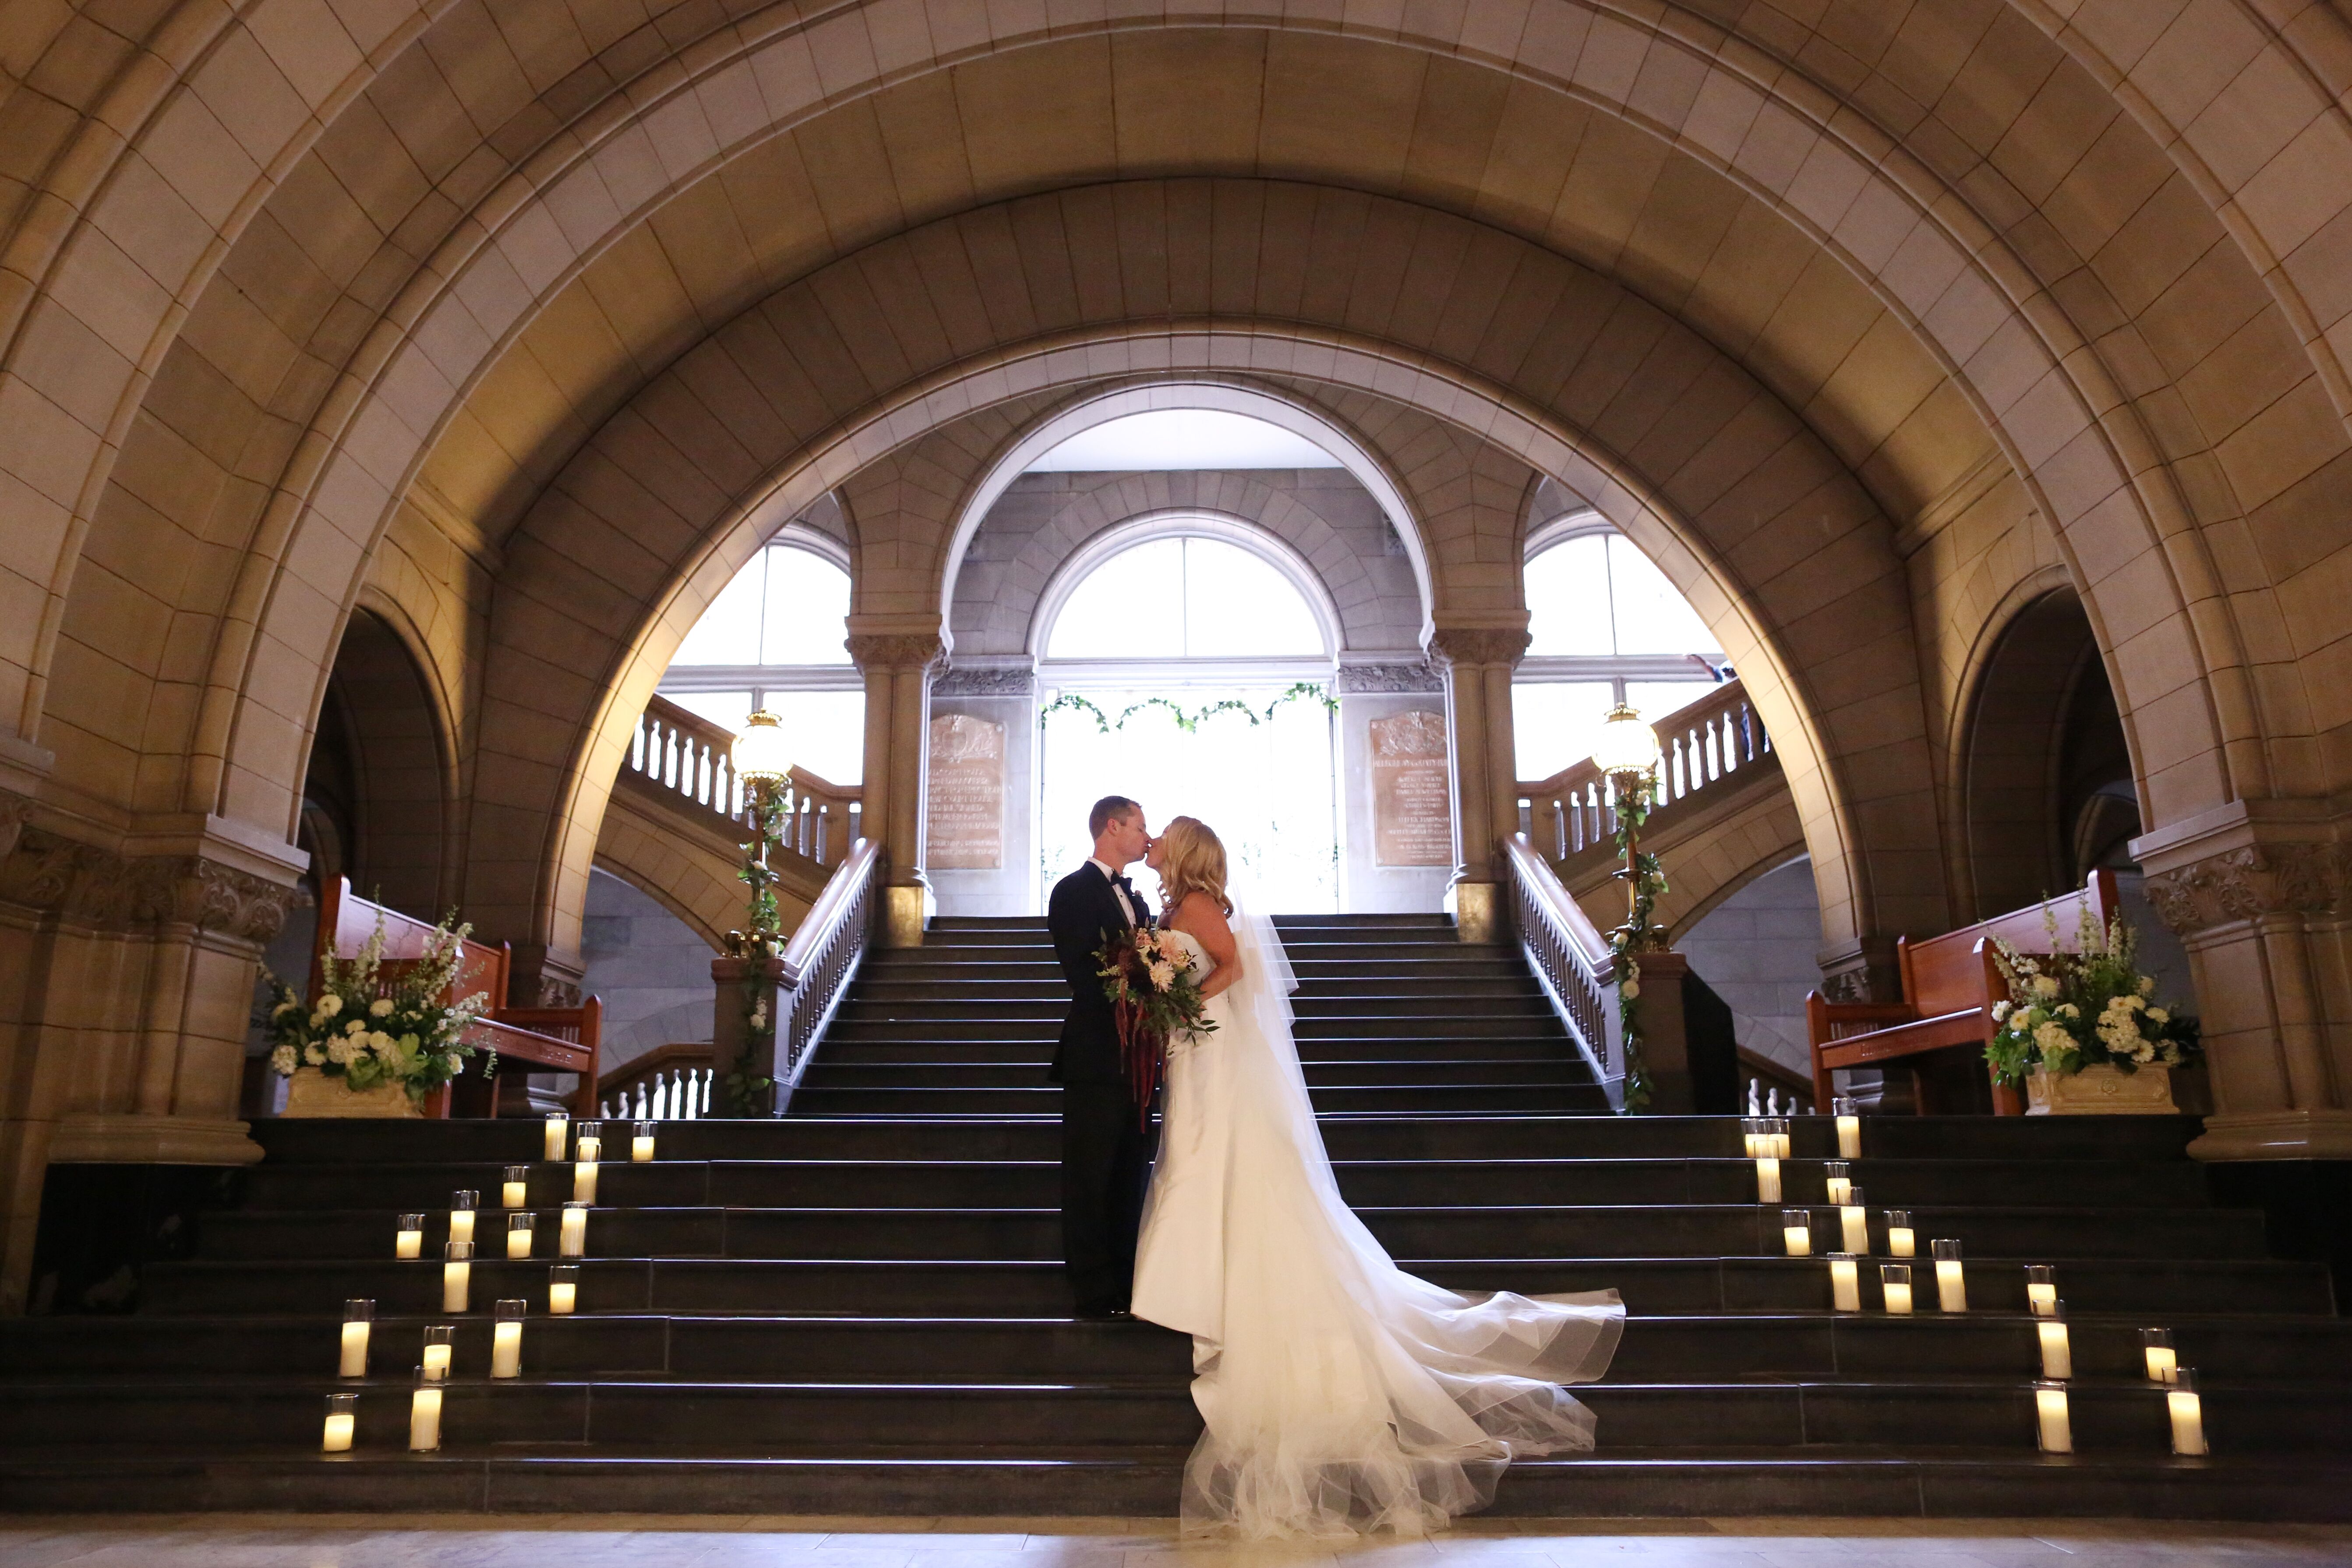 Allegheny County Courthouse Reception Venues The Knot